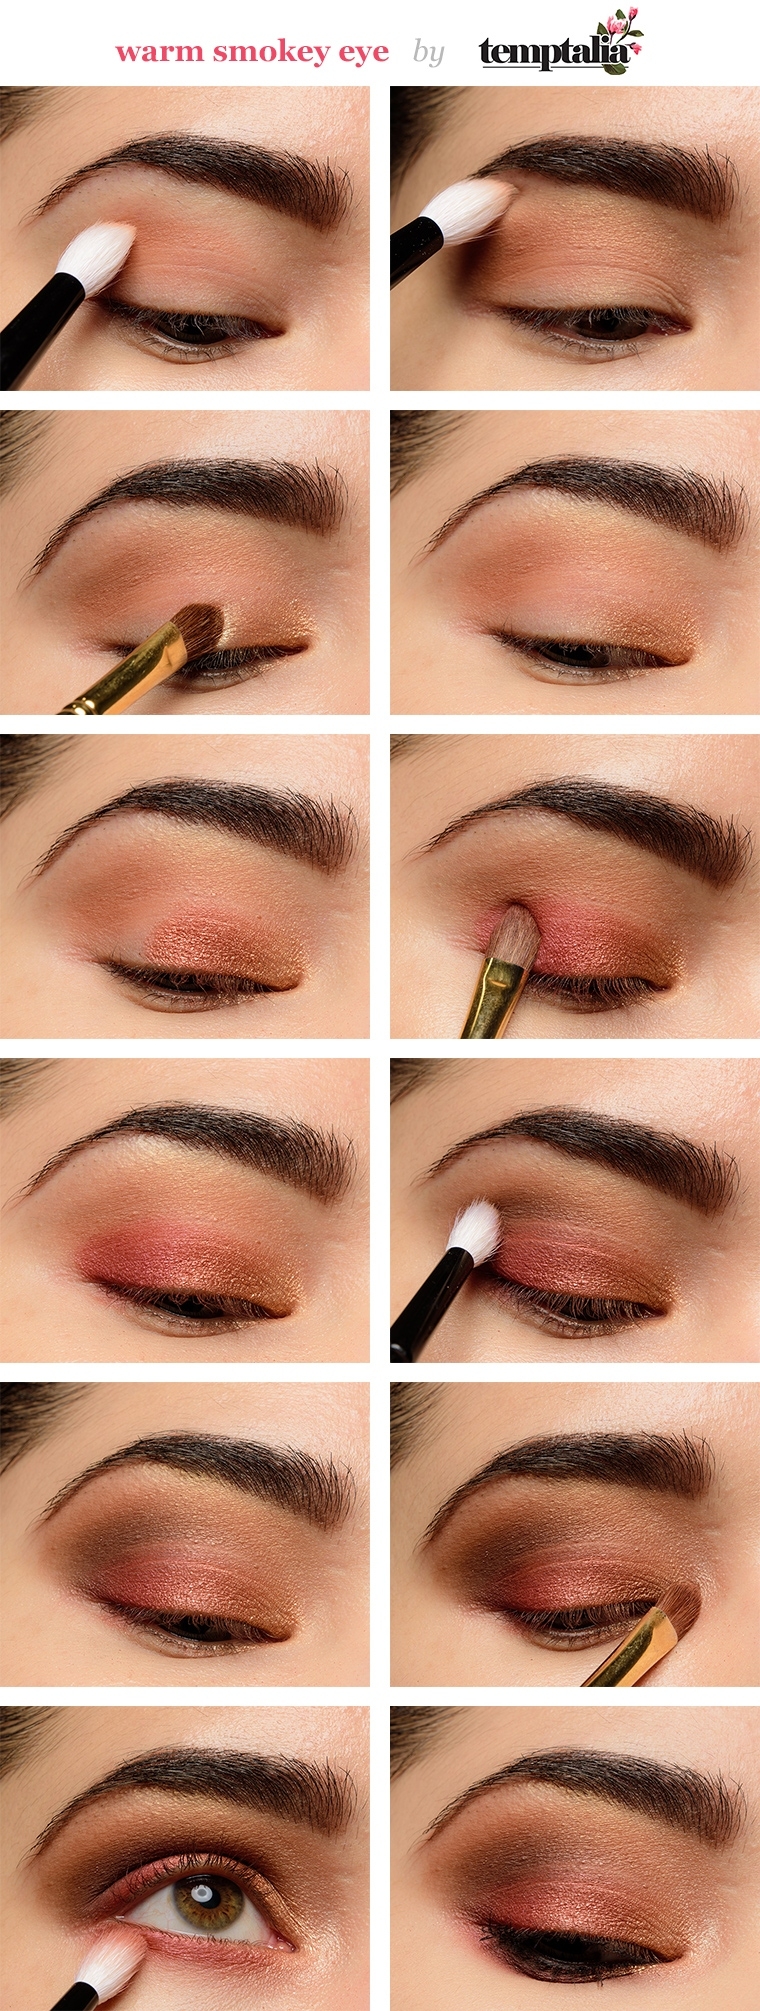 How To Apply Eyeshadow: Smokey Eye Makeup Tutorial For Beginners within How To Do Smoky Eye Makeup With Pictures